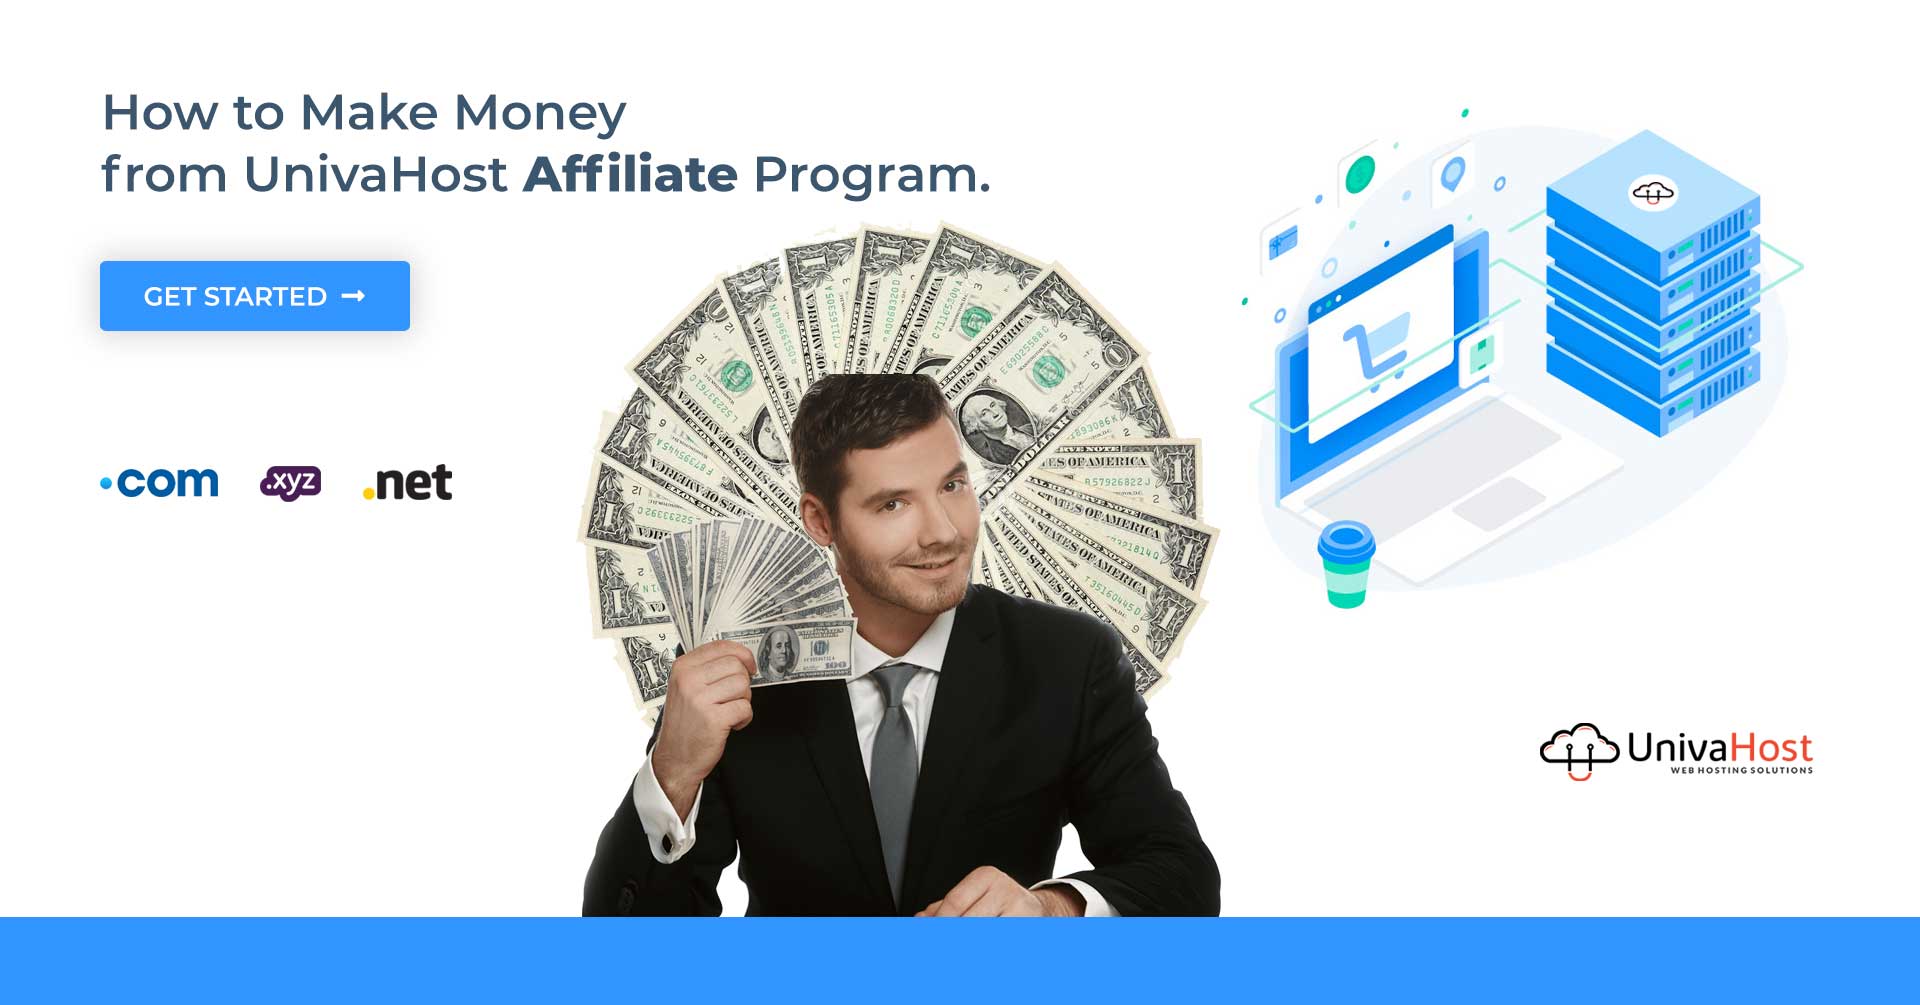 Earn Money With The Univahost Affiliate Program